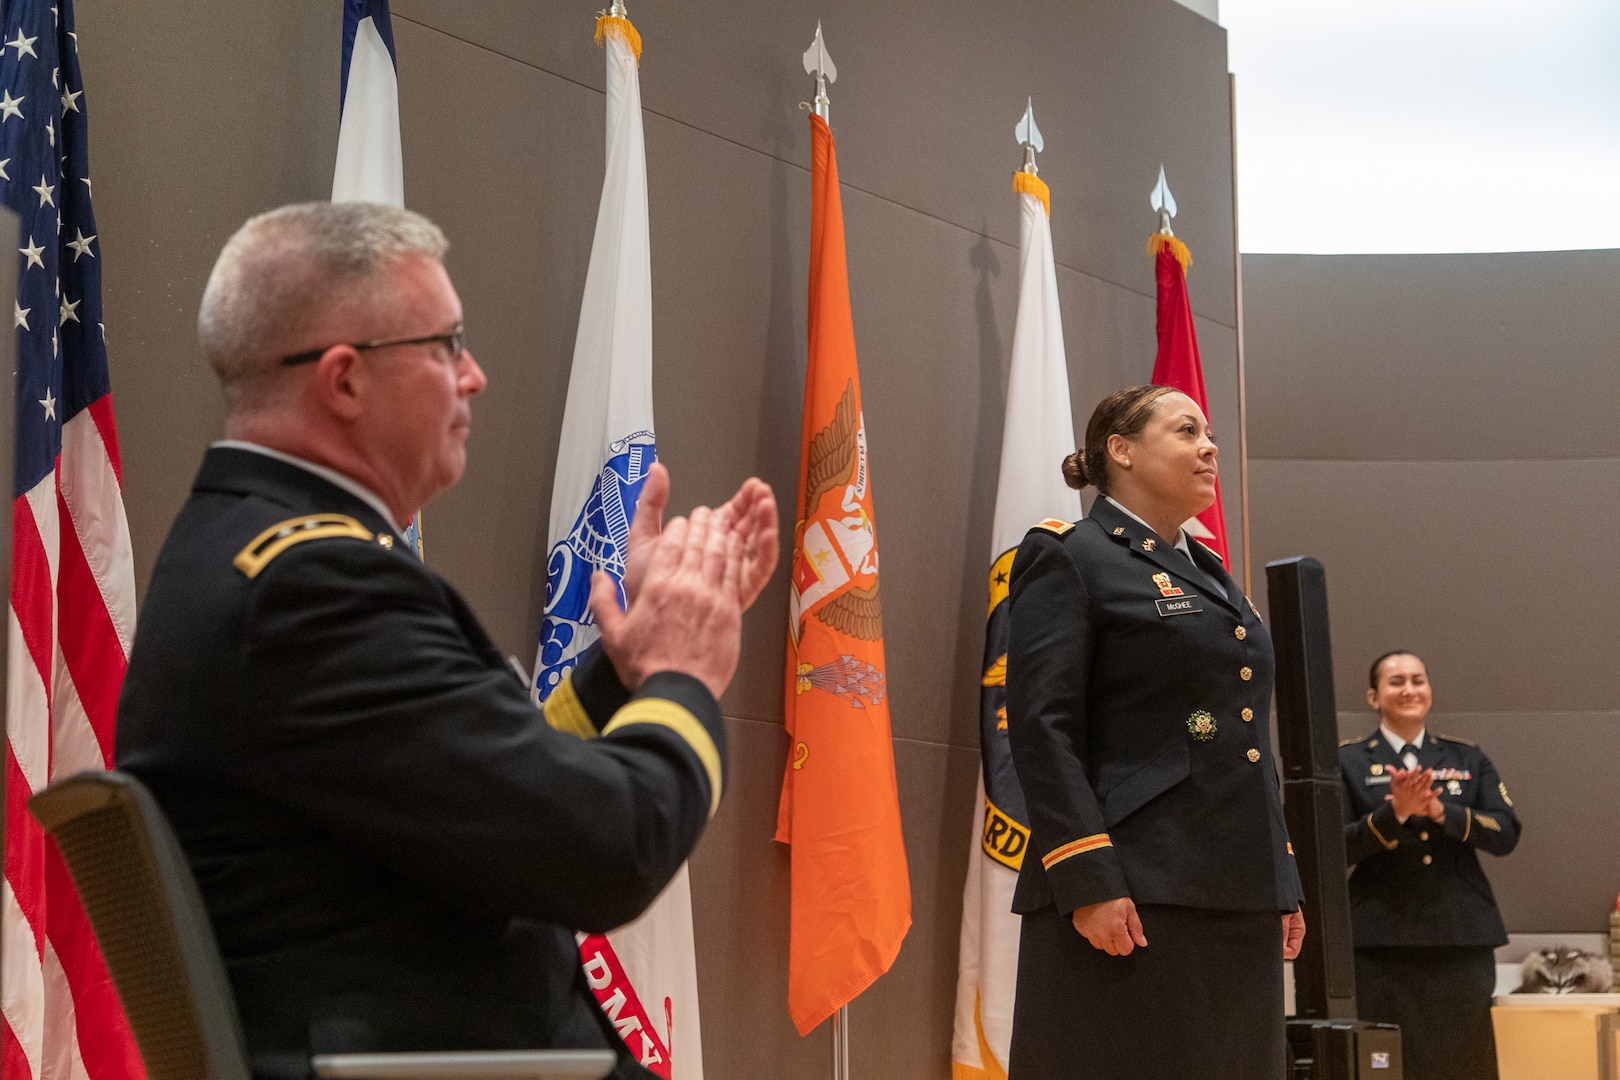 Col. Kim McGhee (center) is applauded by Maj. Gen. James Hoyer, Adjutant General of the West Virginia National Guard, during a formal promotion ceremony held May 20, 2019, at the Army National Guard Readiness Center in Arlington, Virginia. McGhee is the first African-American female to be promoted to the rank of colonel in the West Virginia Army National Guard. (Courtesy photo)